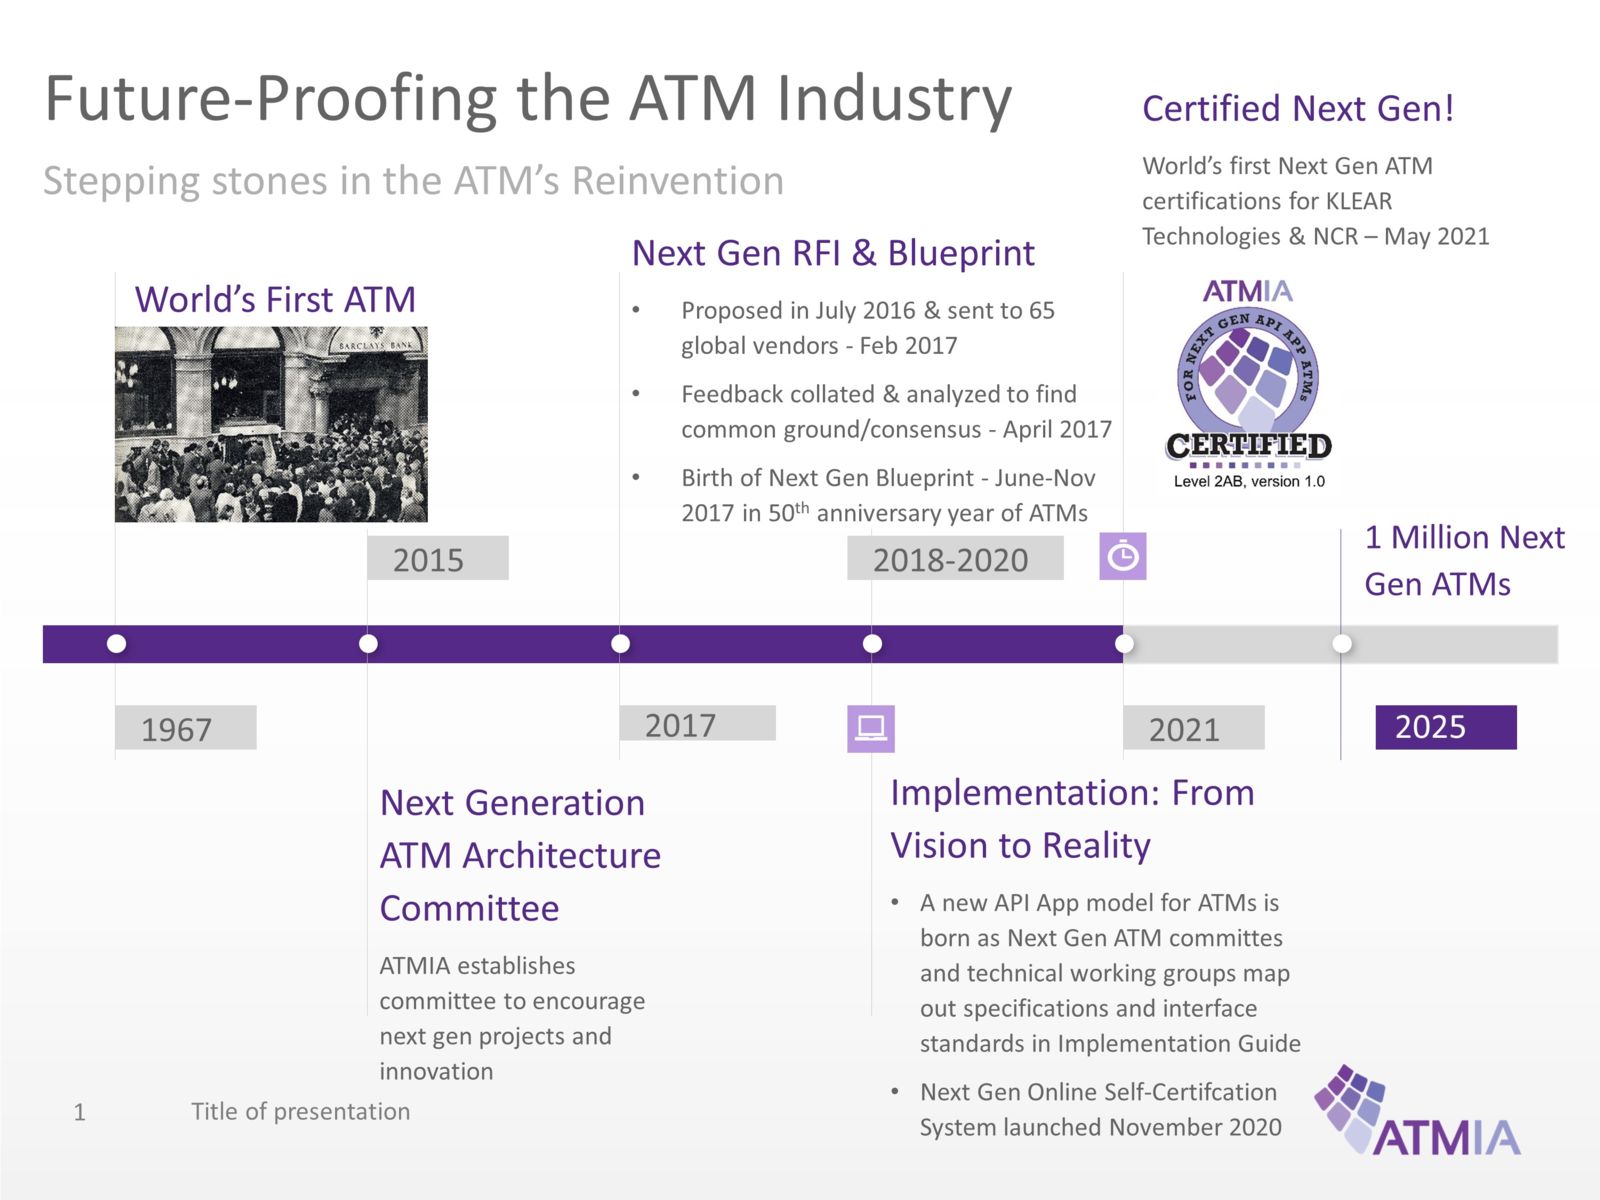 Future-Proofing the ATM Industry Slide